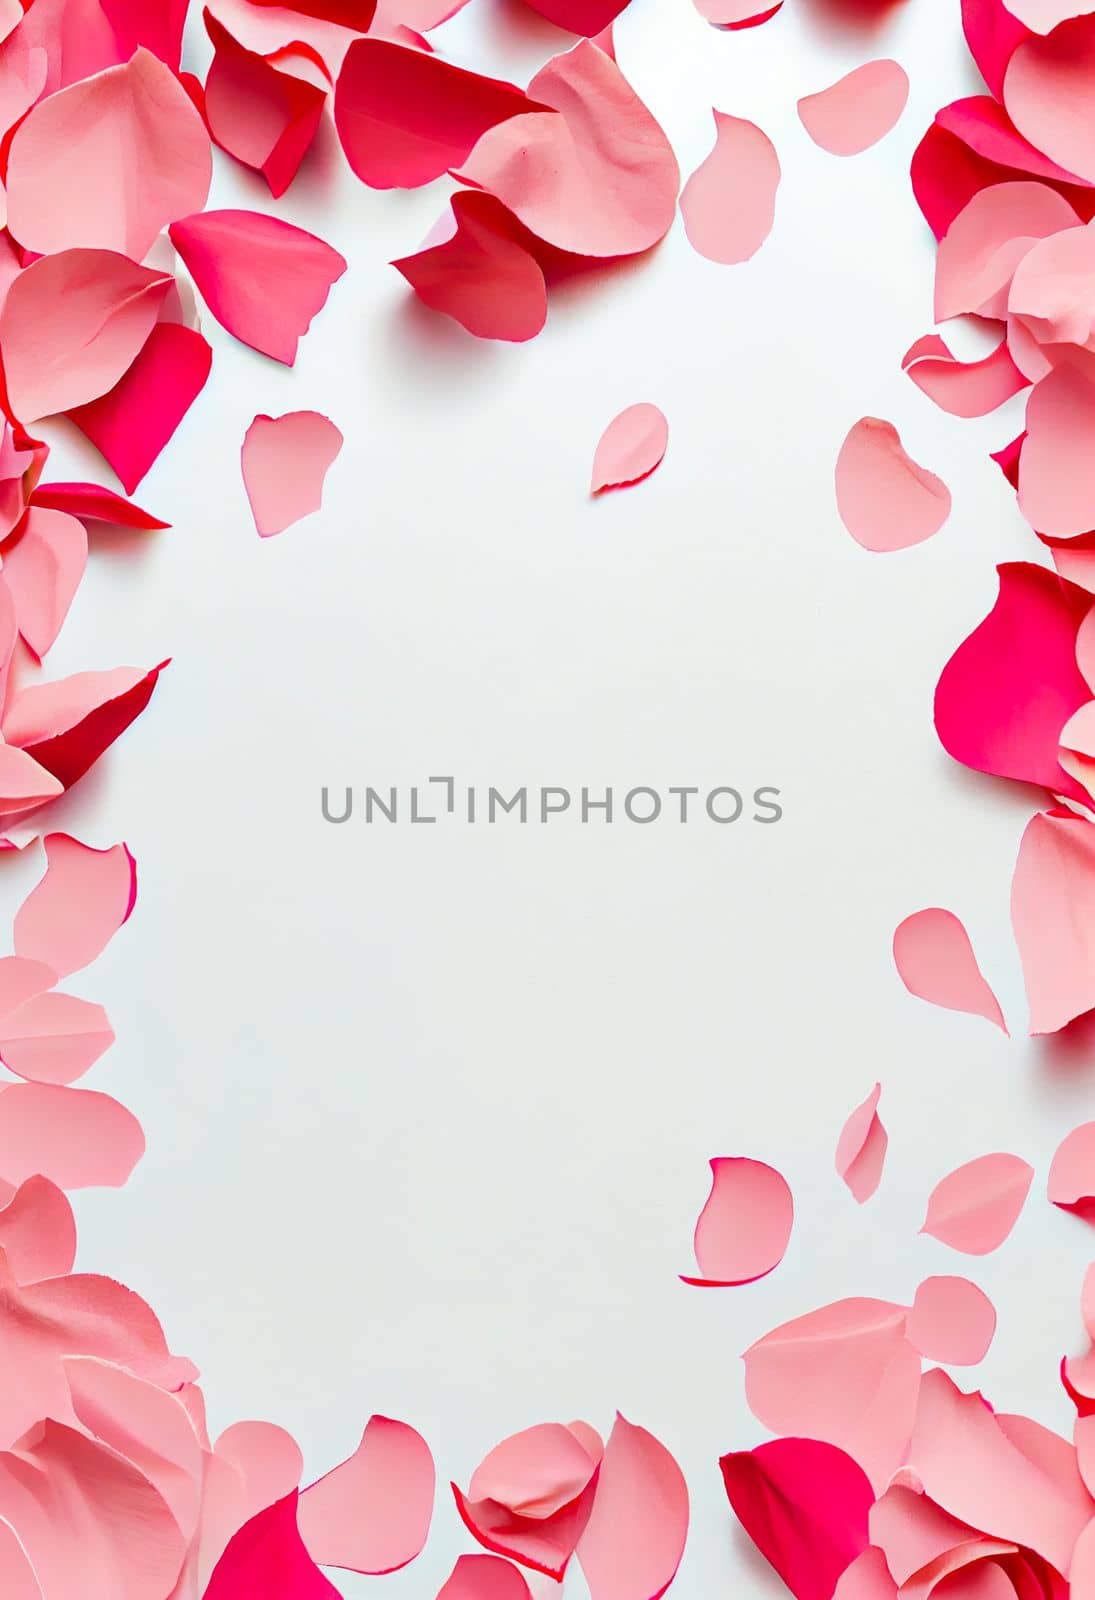 Valentine frame made of rose flowers, confetti on white background, Flat lay, top view with copy space. Beautiful Valentine's Day flower background. 3D illustration